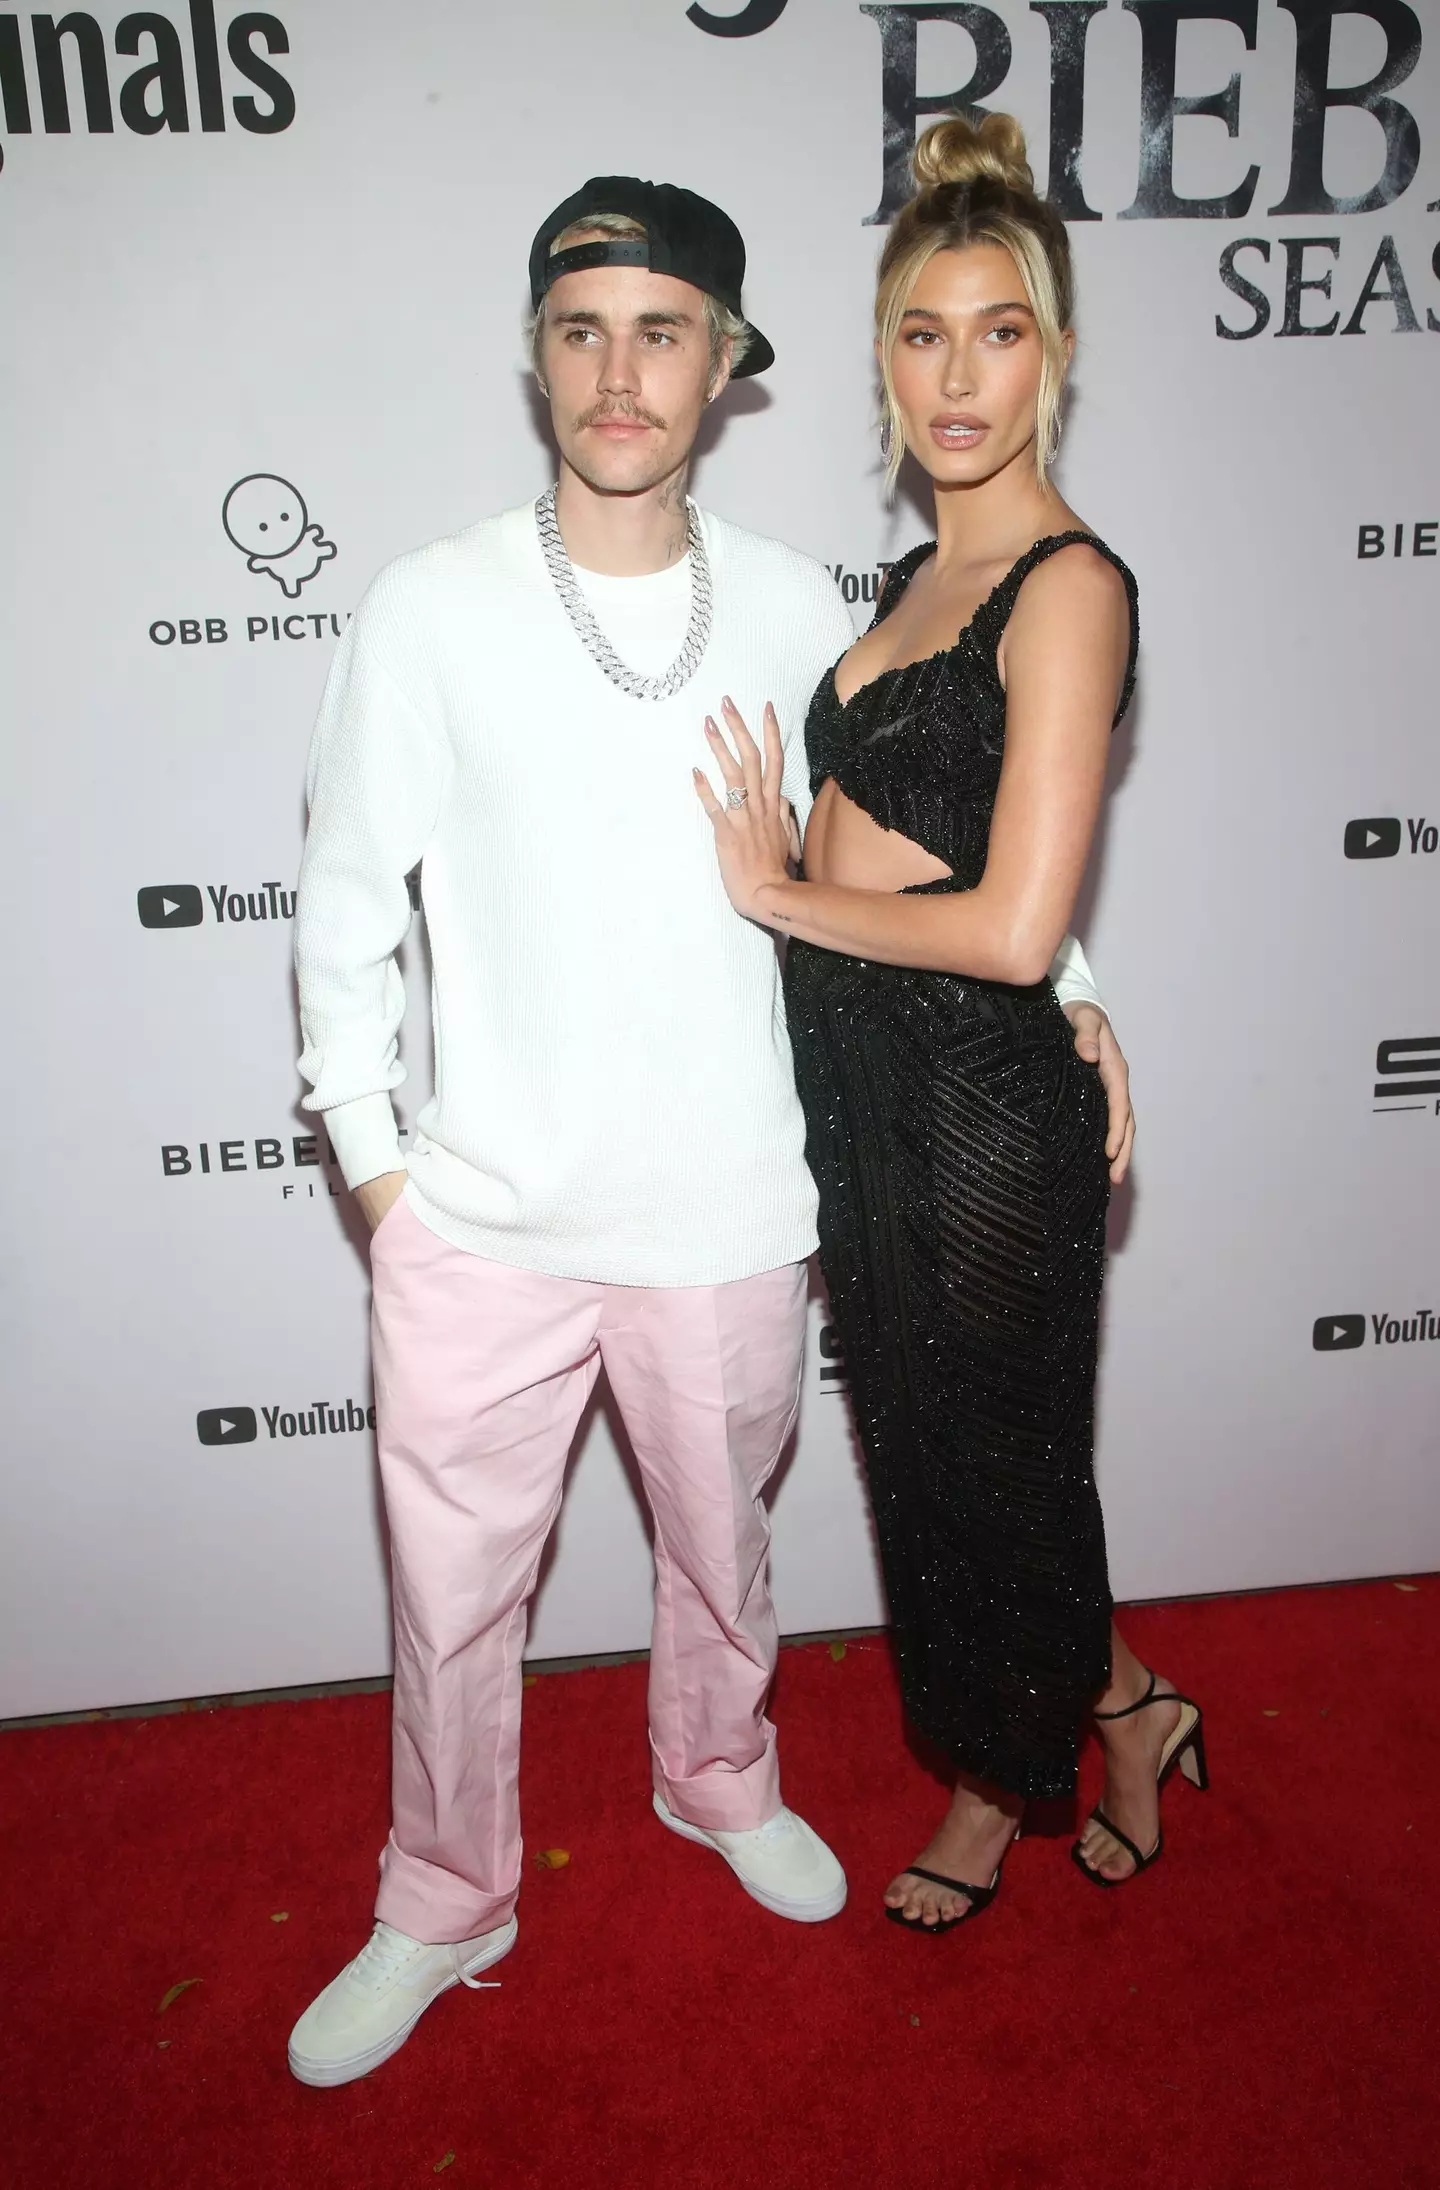 Hailey Bieber has set the record straight once and for all on her and her husband Justin Bieber’s relationship timeline.